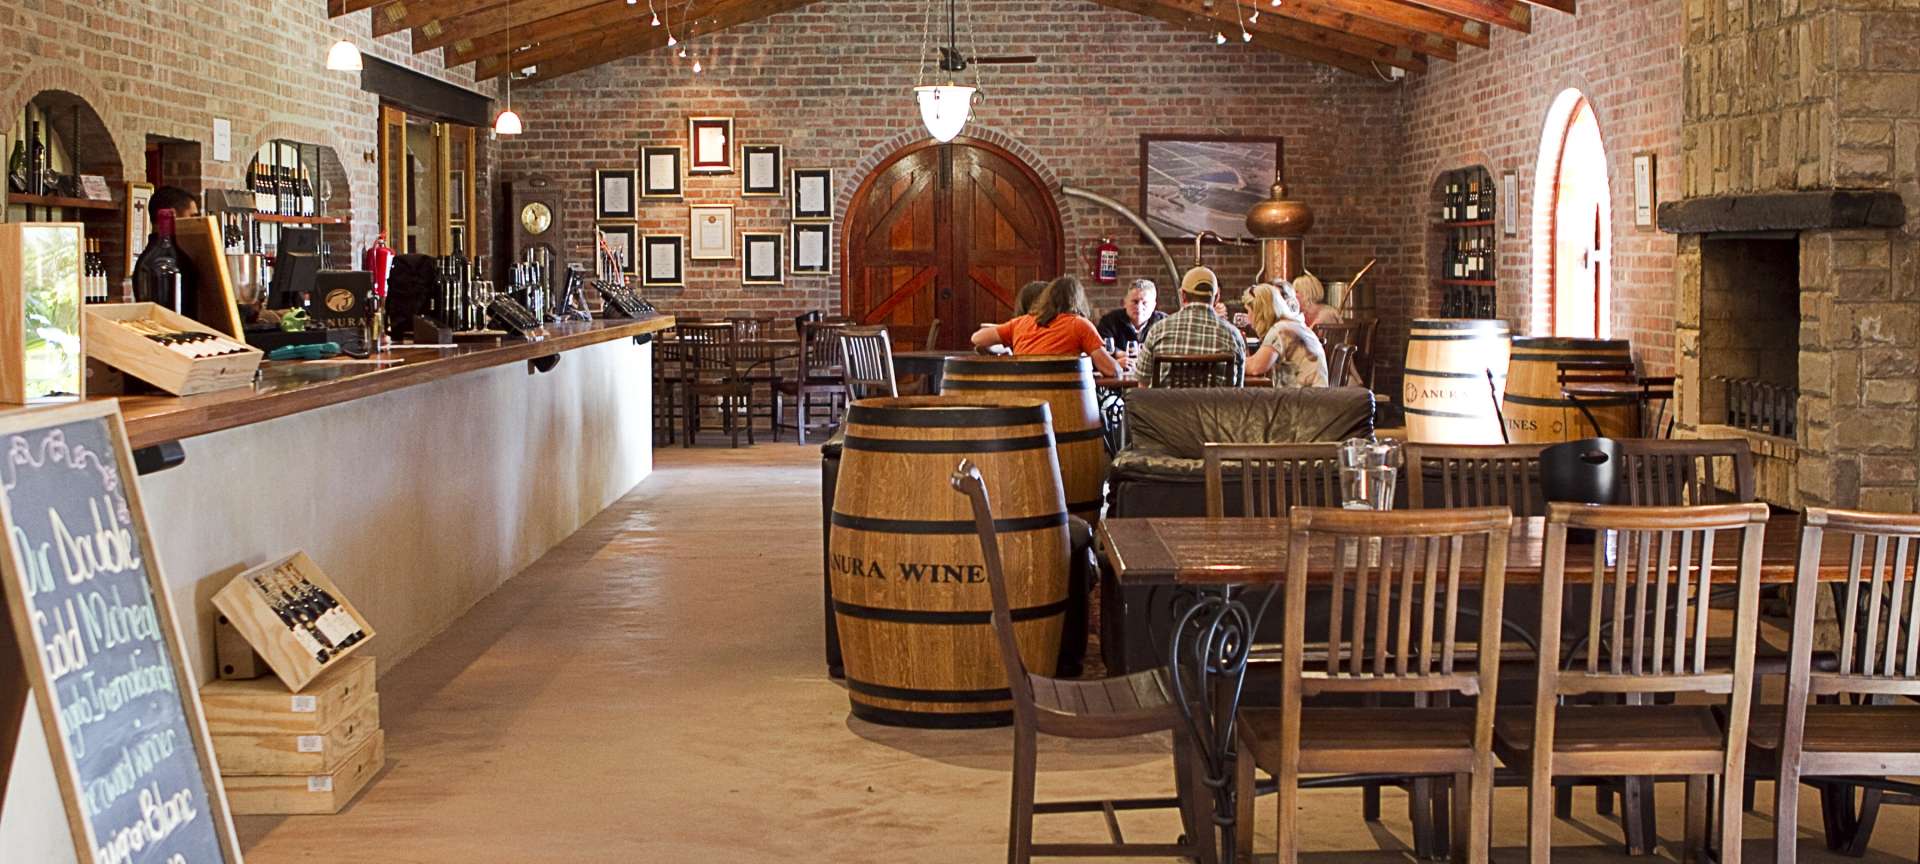 The winemaking tradition in the Cape region is one of the World's oldest and most renowned